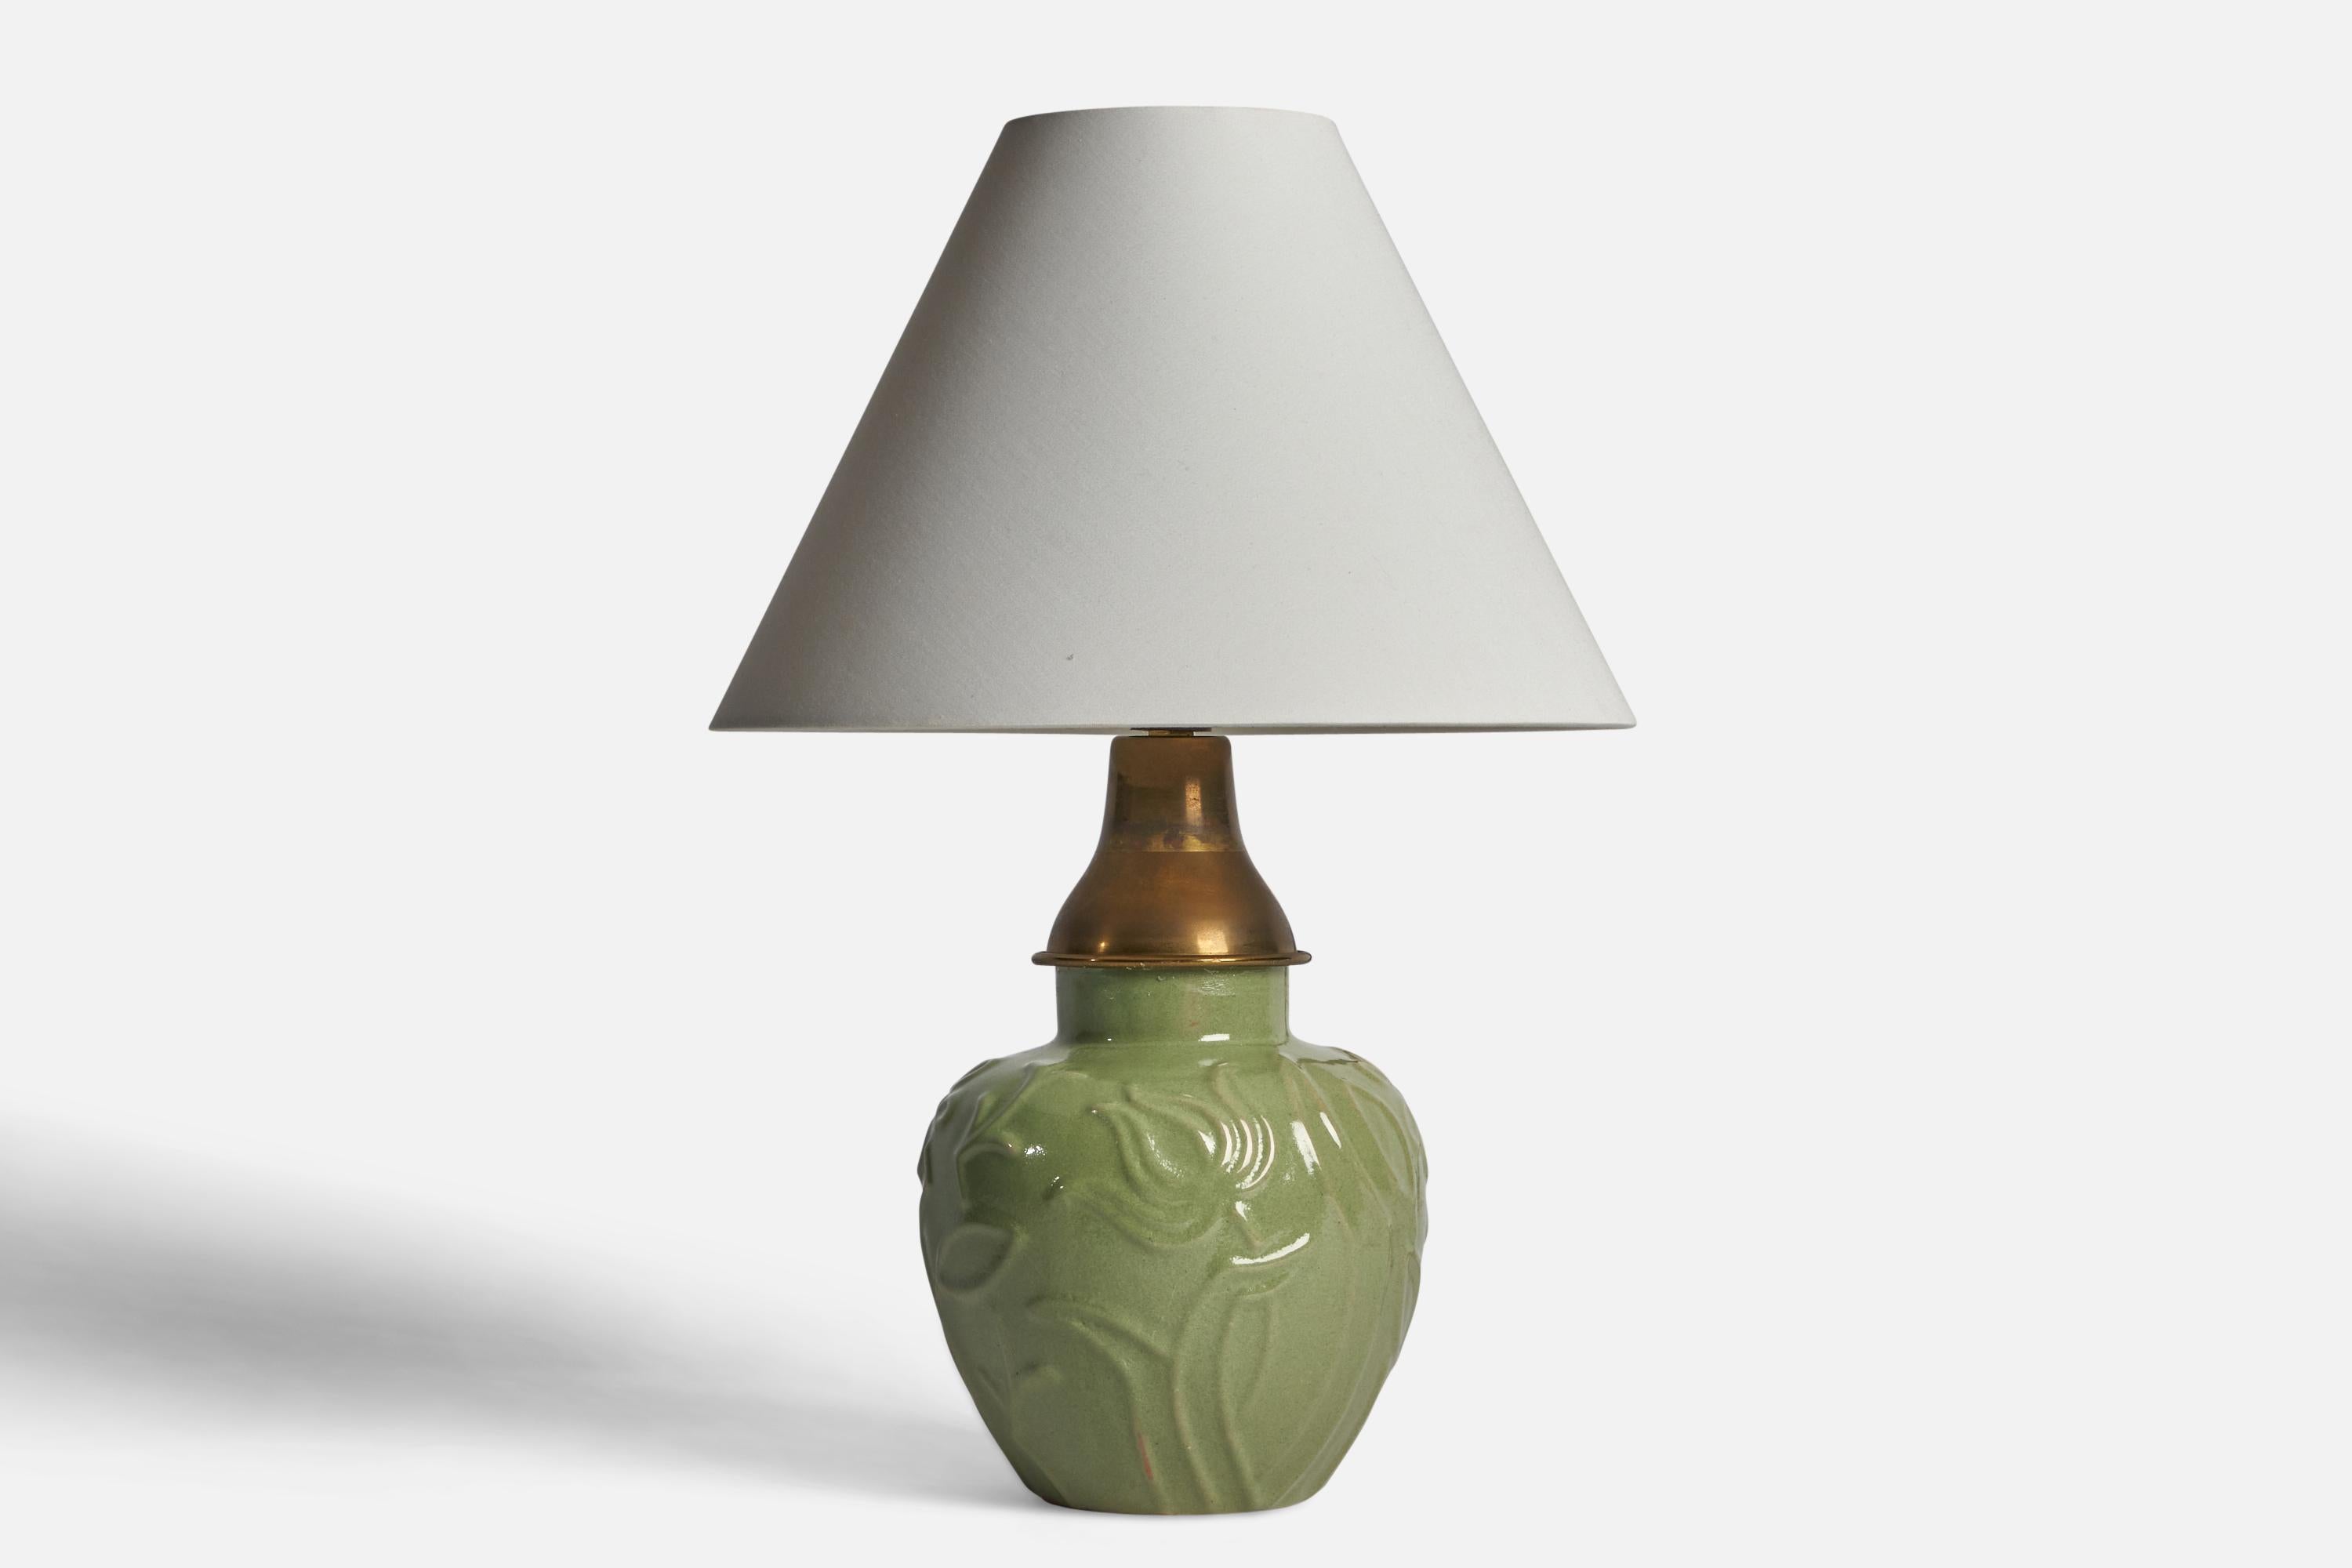 A green-glazed earthenware and brass table lamp designed and produced by Upsala Ekeby, Sweden, 1930s.

Dimensions of Lamp (inches): 11” H x 6” Diameter
Dimensions of Shade (inches): 3.5” Top Diameter x 10” Bottom Diameter x 7.25”
Dimensions of Lamp